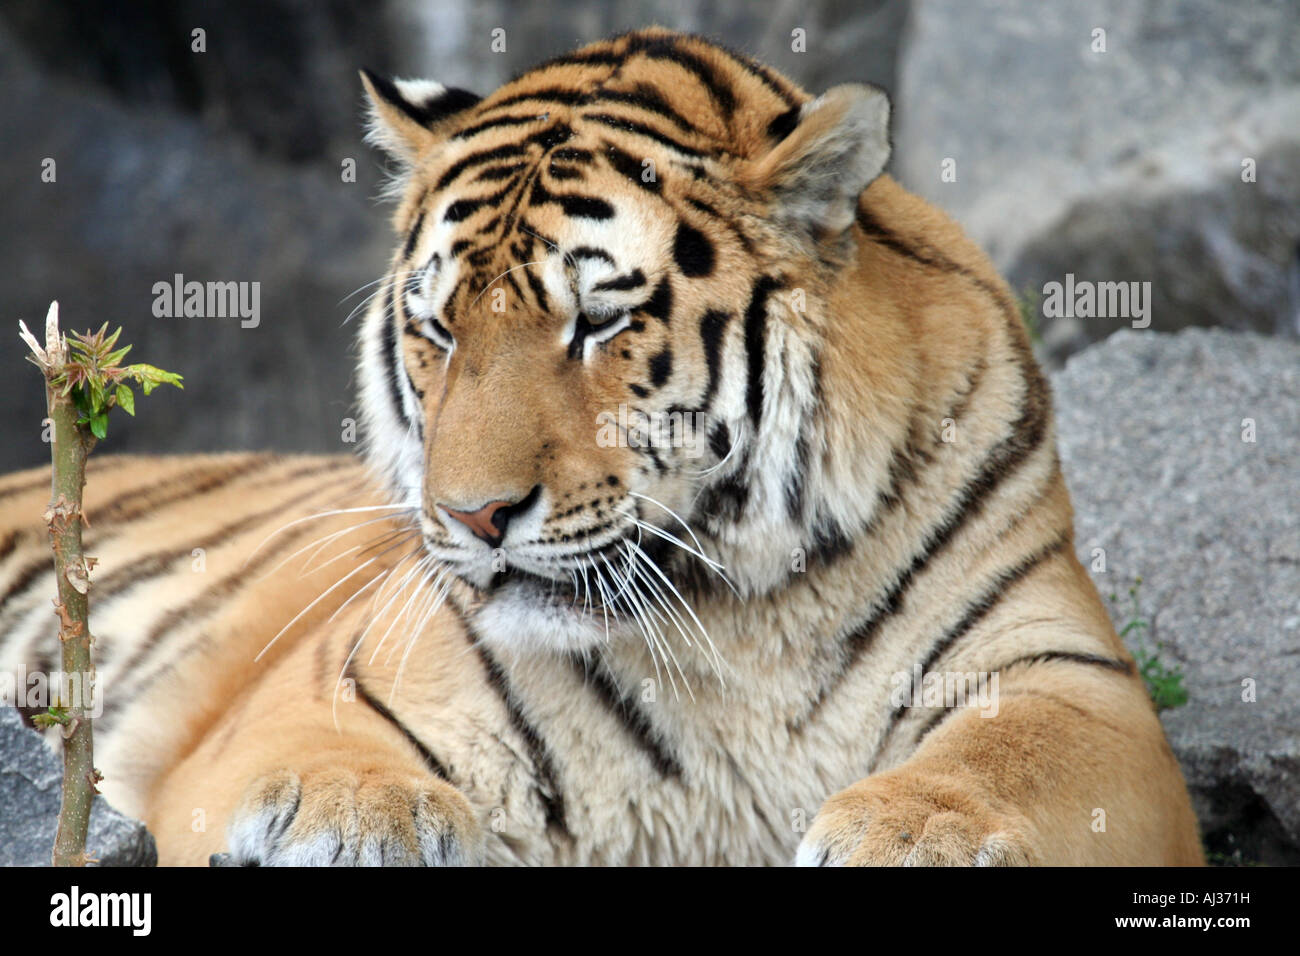 Portrait of an Indochinese tiger (Panthera tigris corbetti), seen here in Thailand. Stock Photo